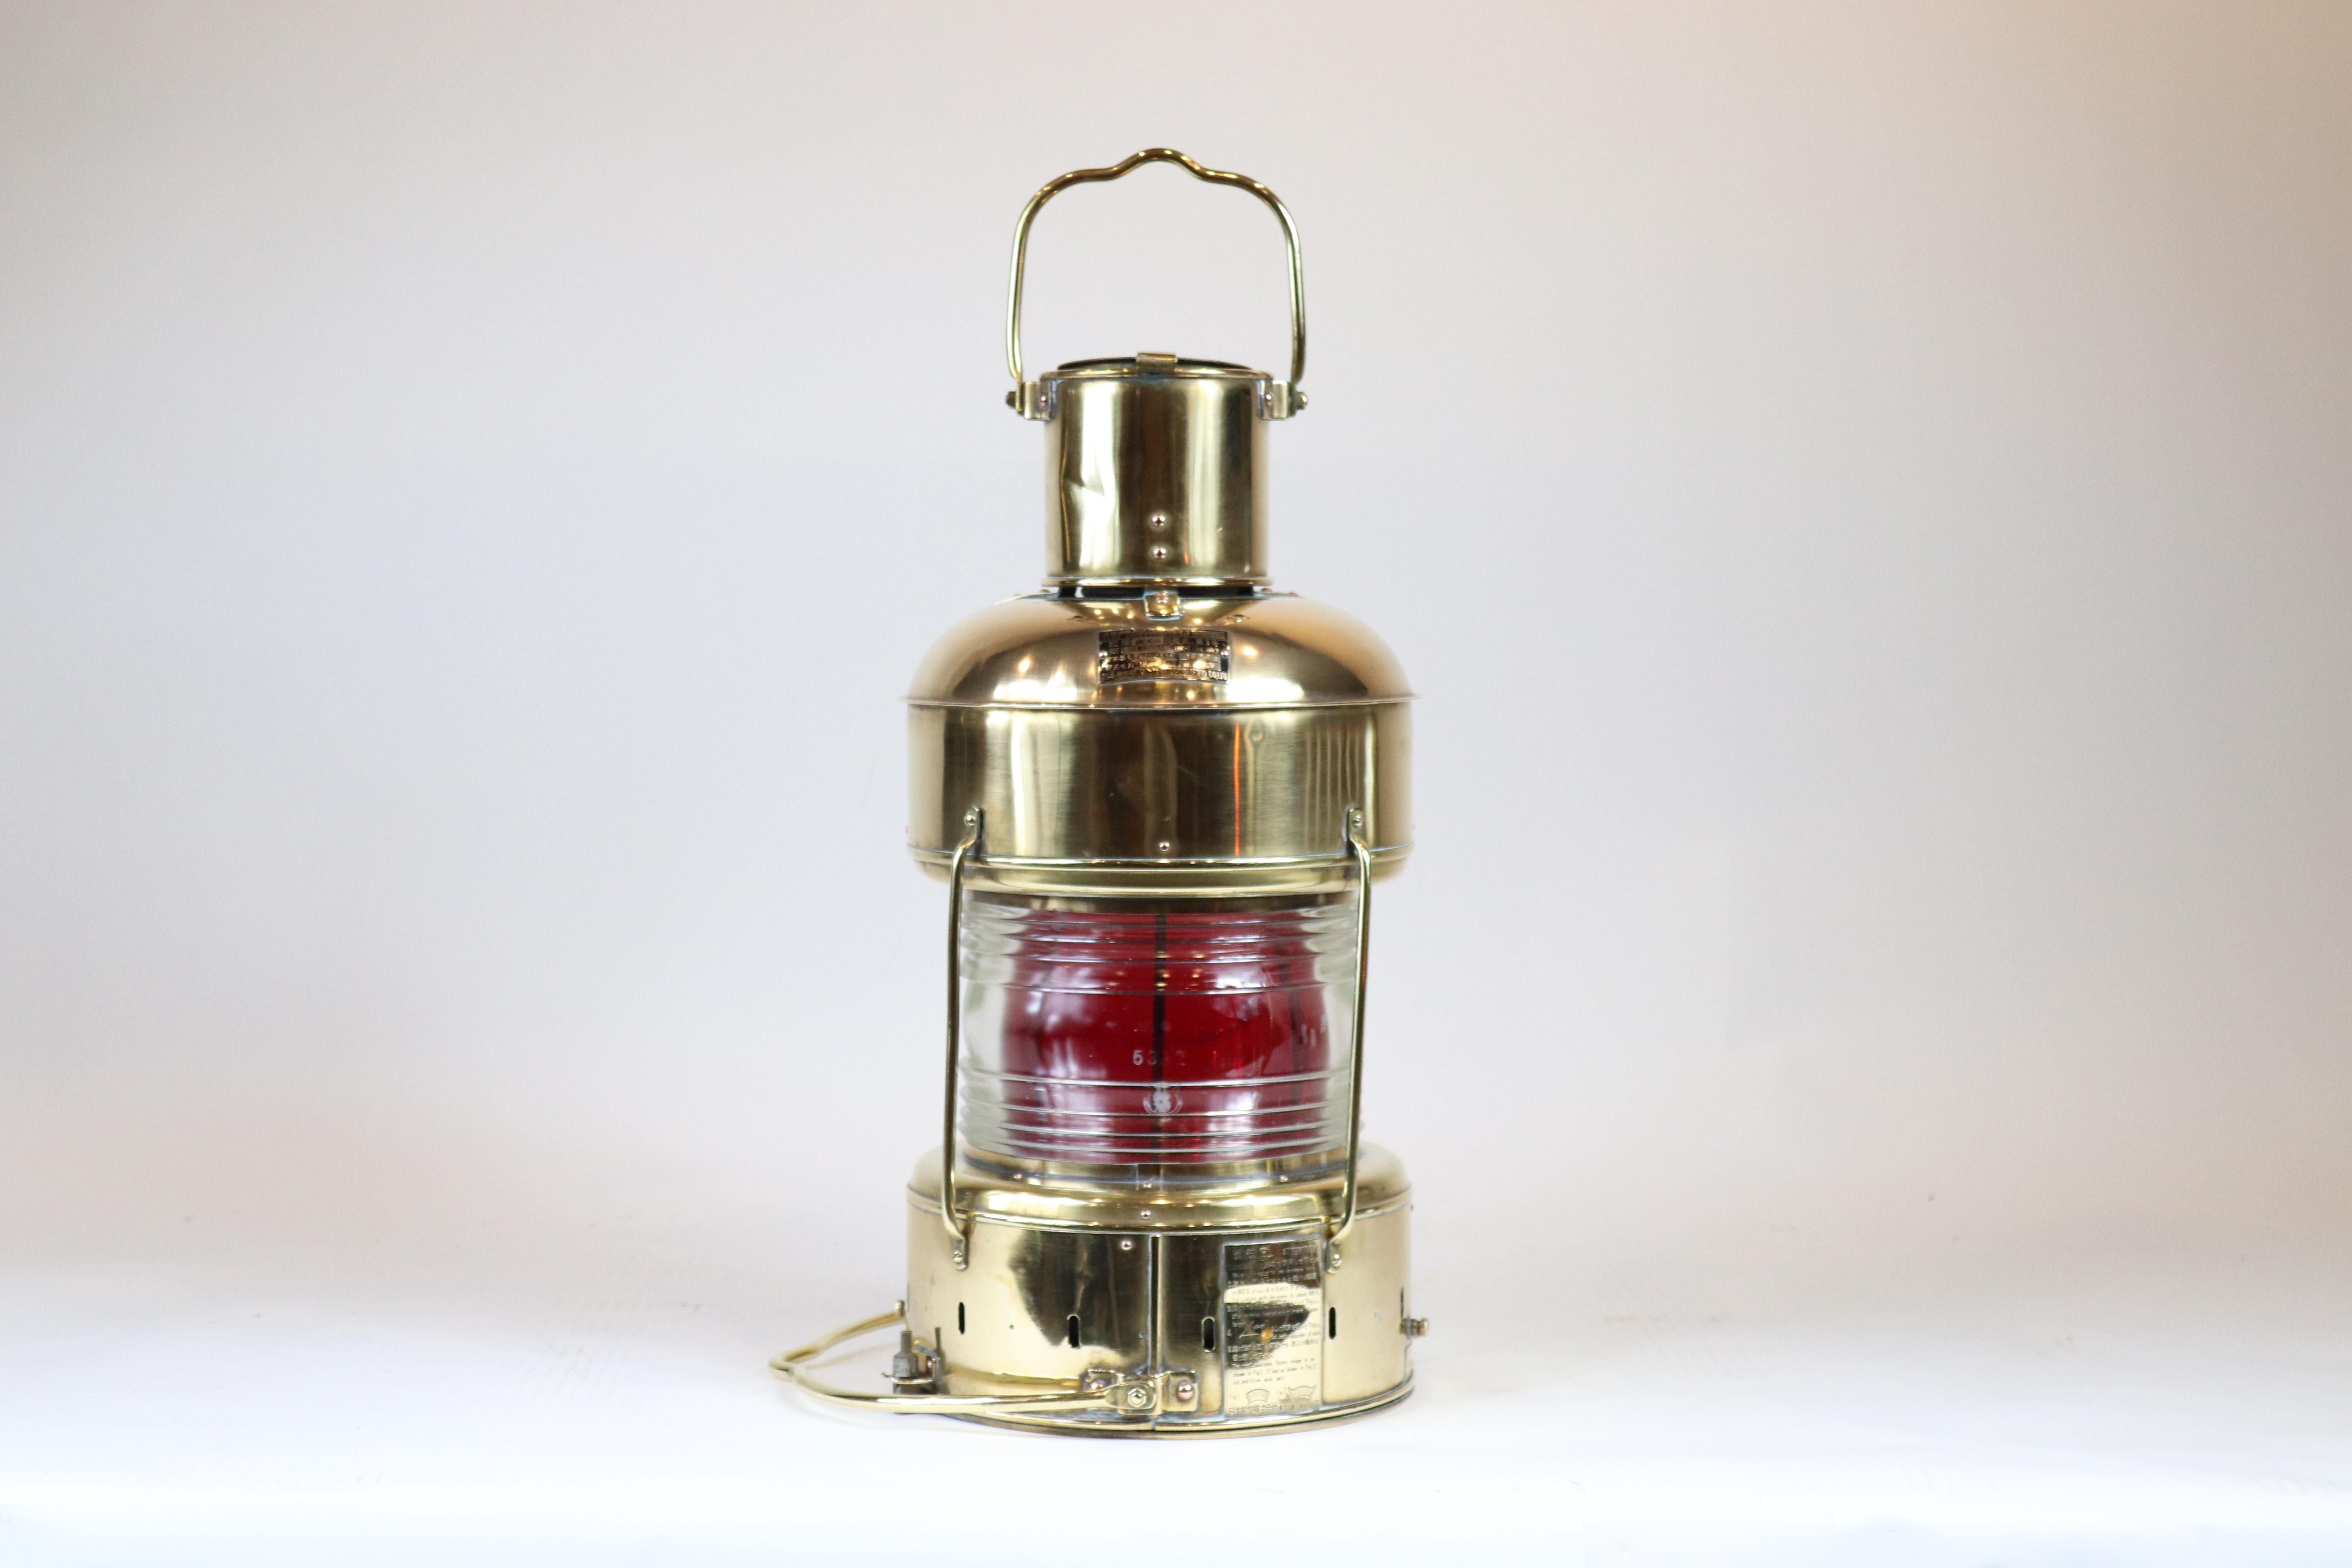 Brass anchor lantern with highly polished Fresnel lens with removable red filter. Japanese made, dated 1969. 10